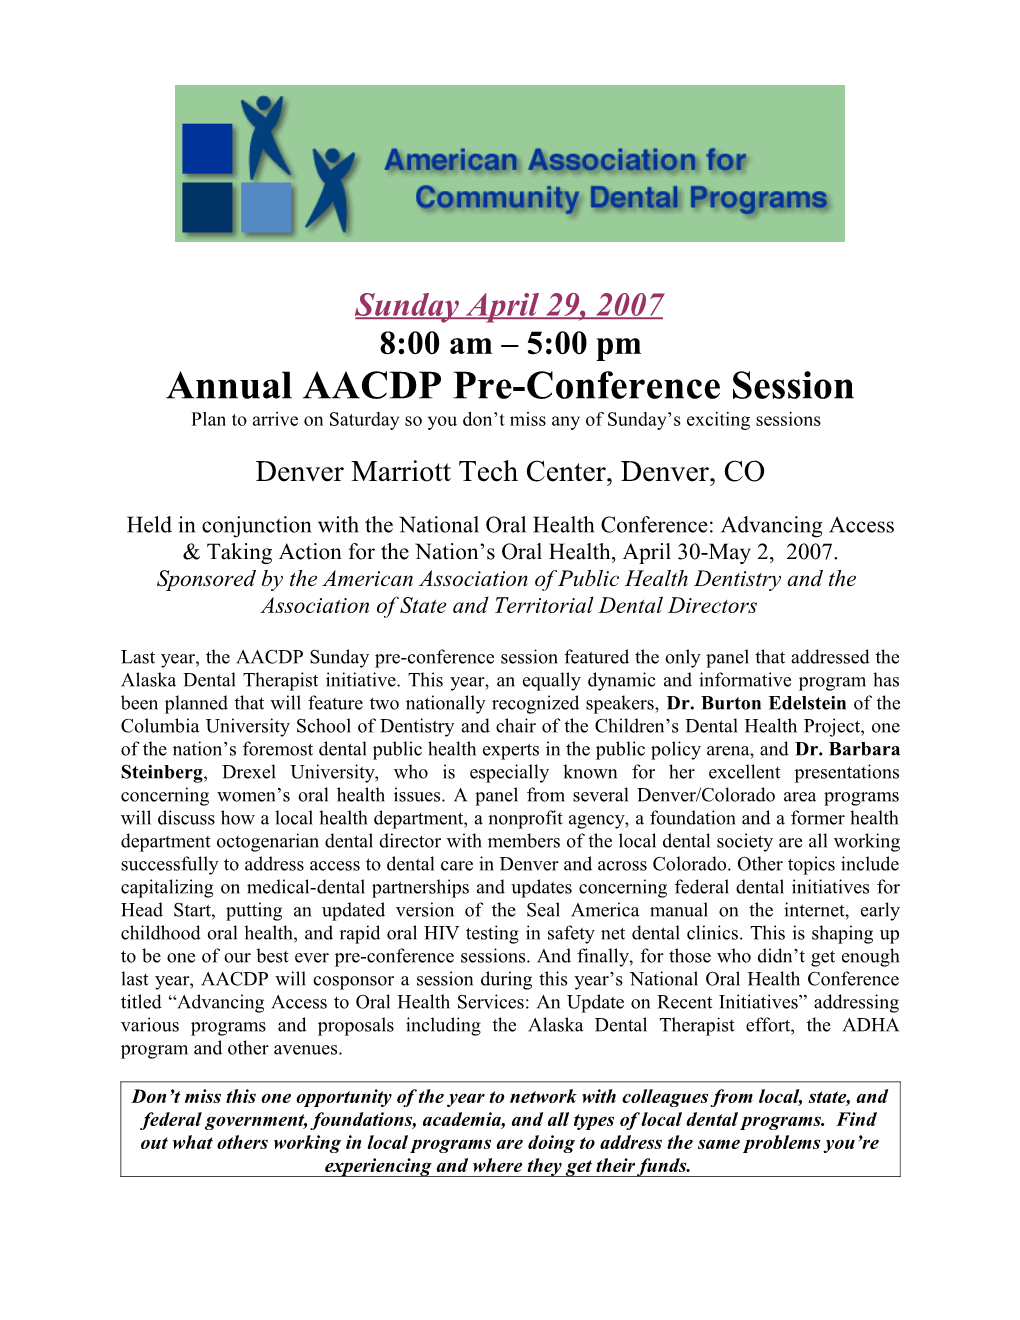 Proposed Schedule for AACDP Program